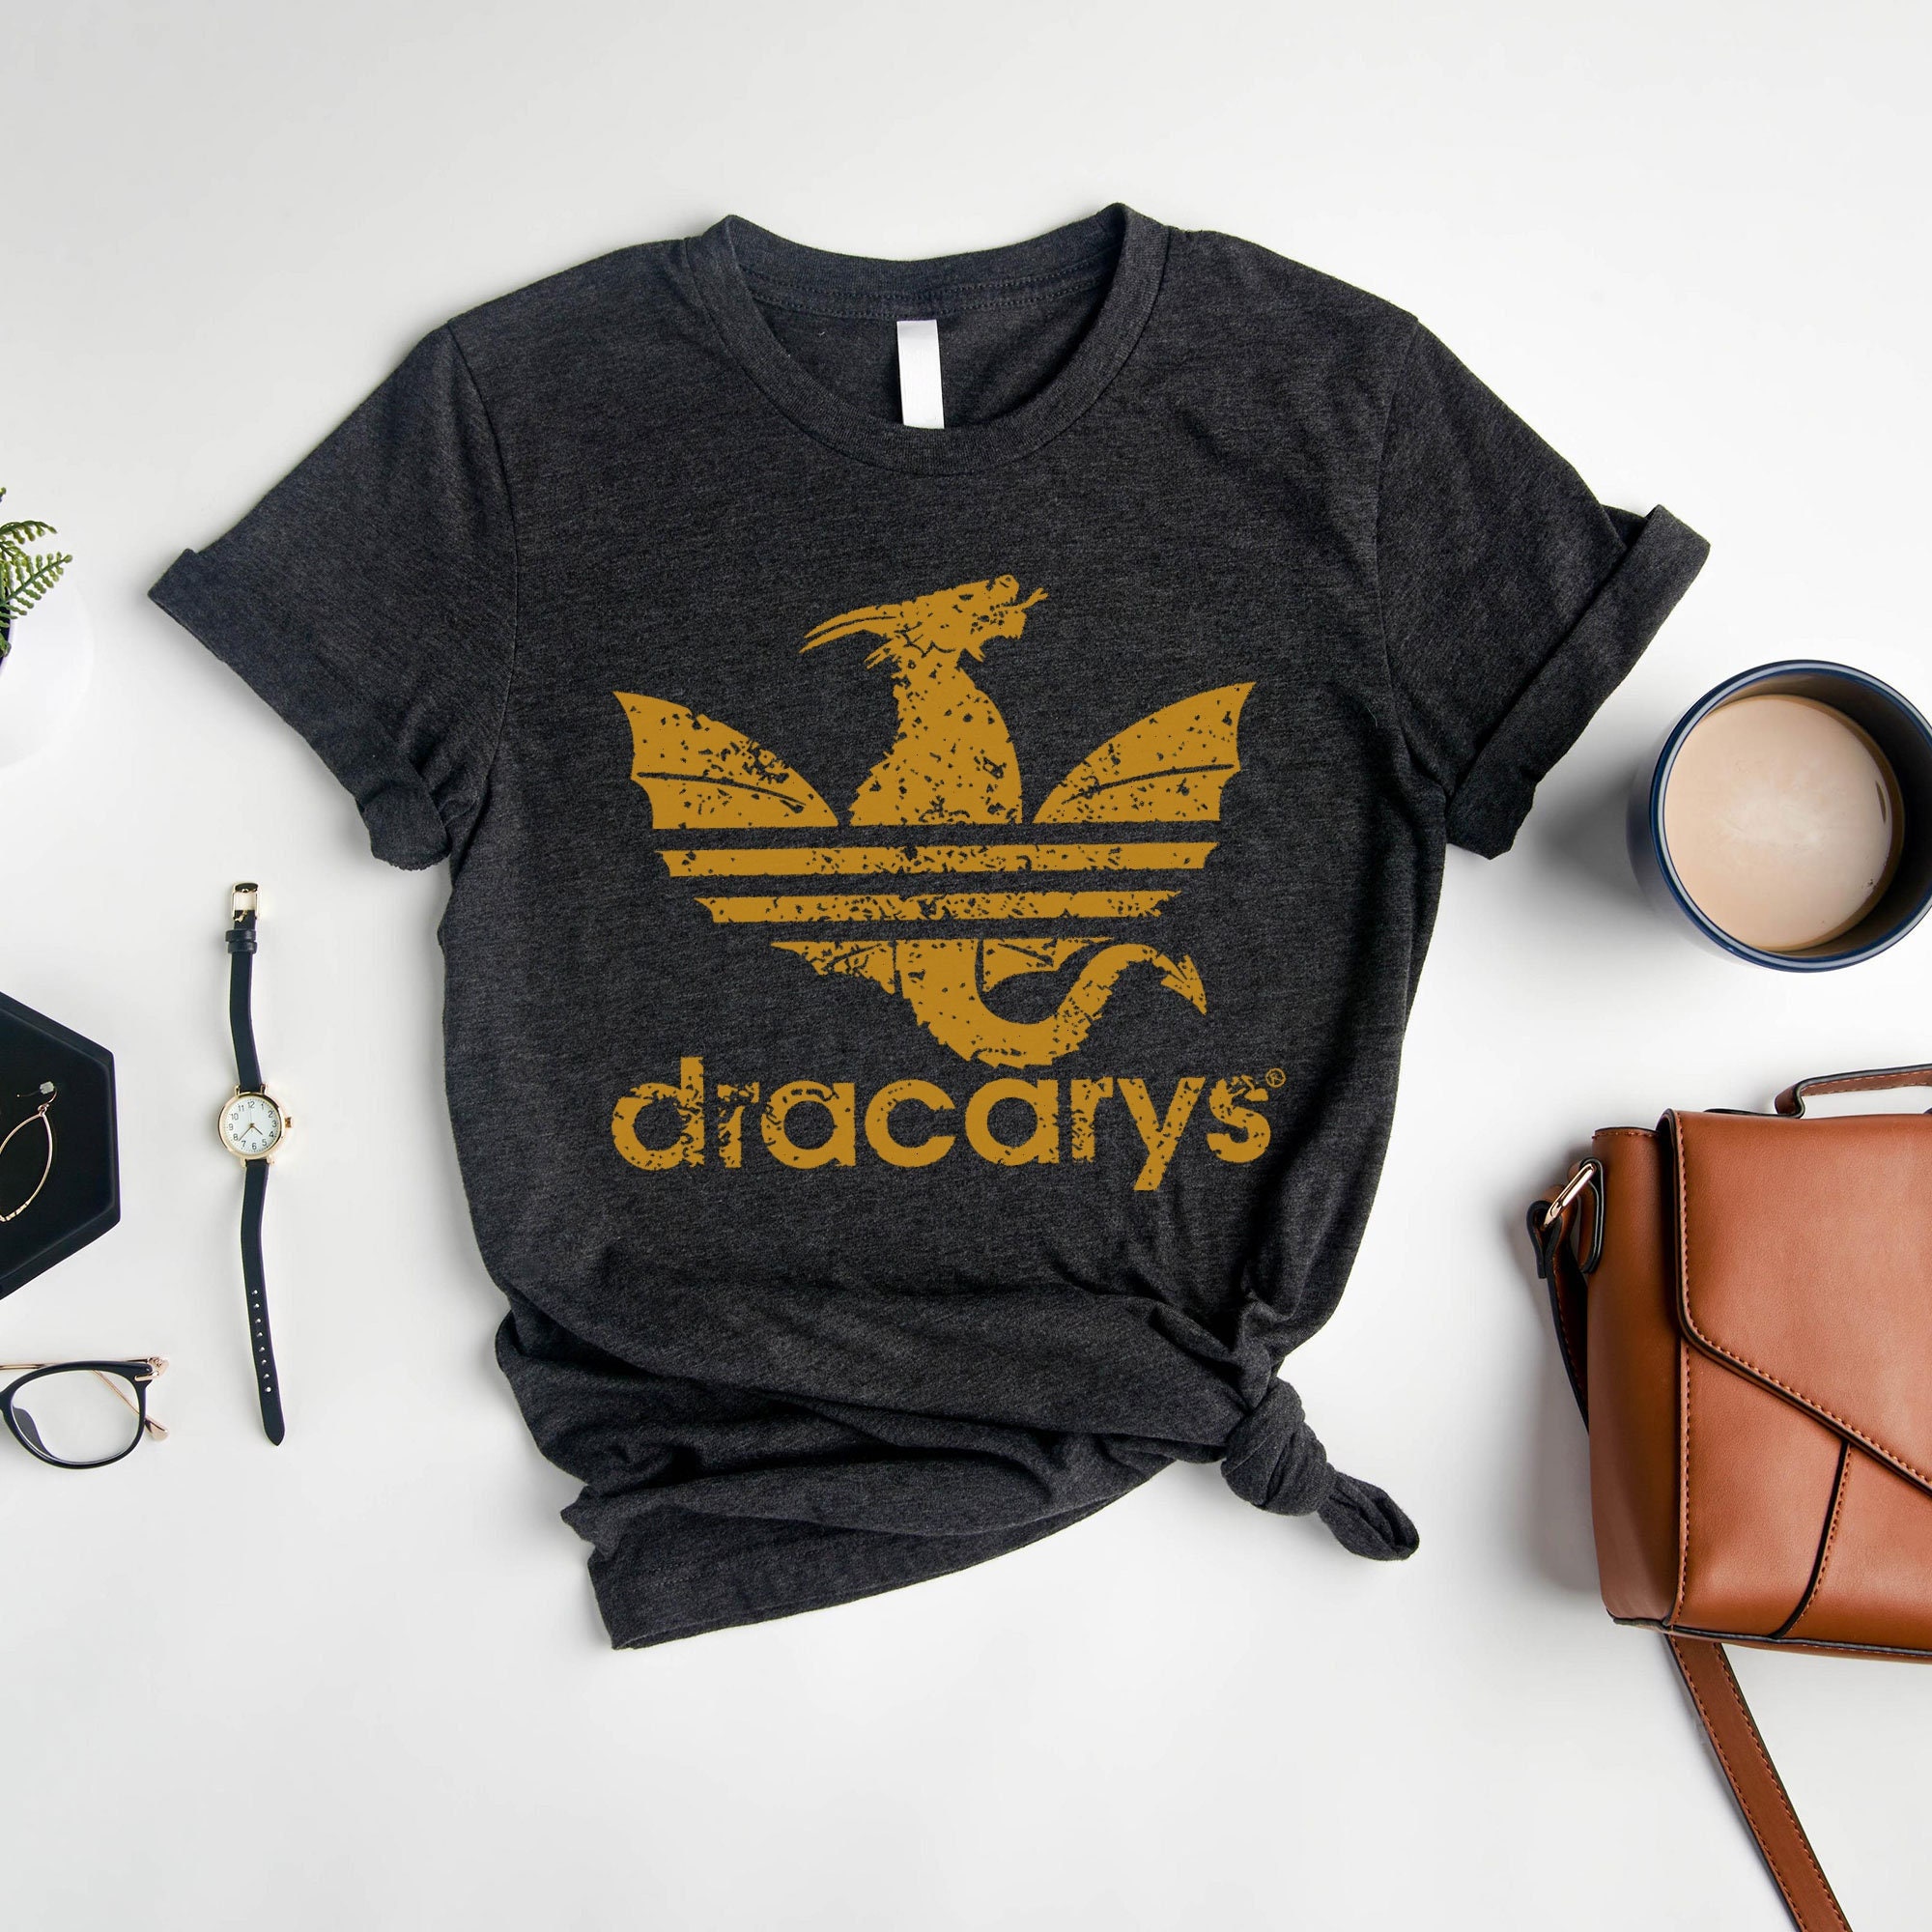 Discover Dracarys, House of Dragon shirt, Game of Thrones Tshirt